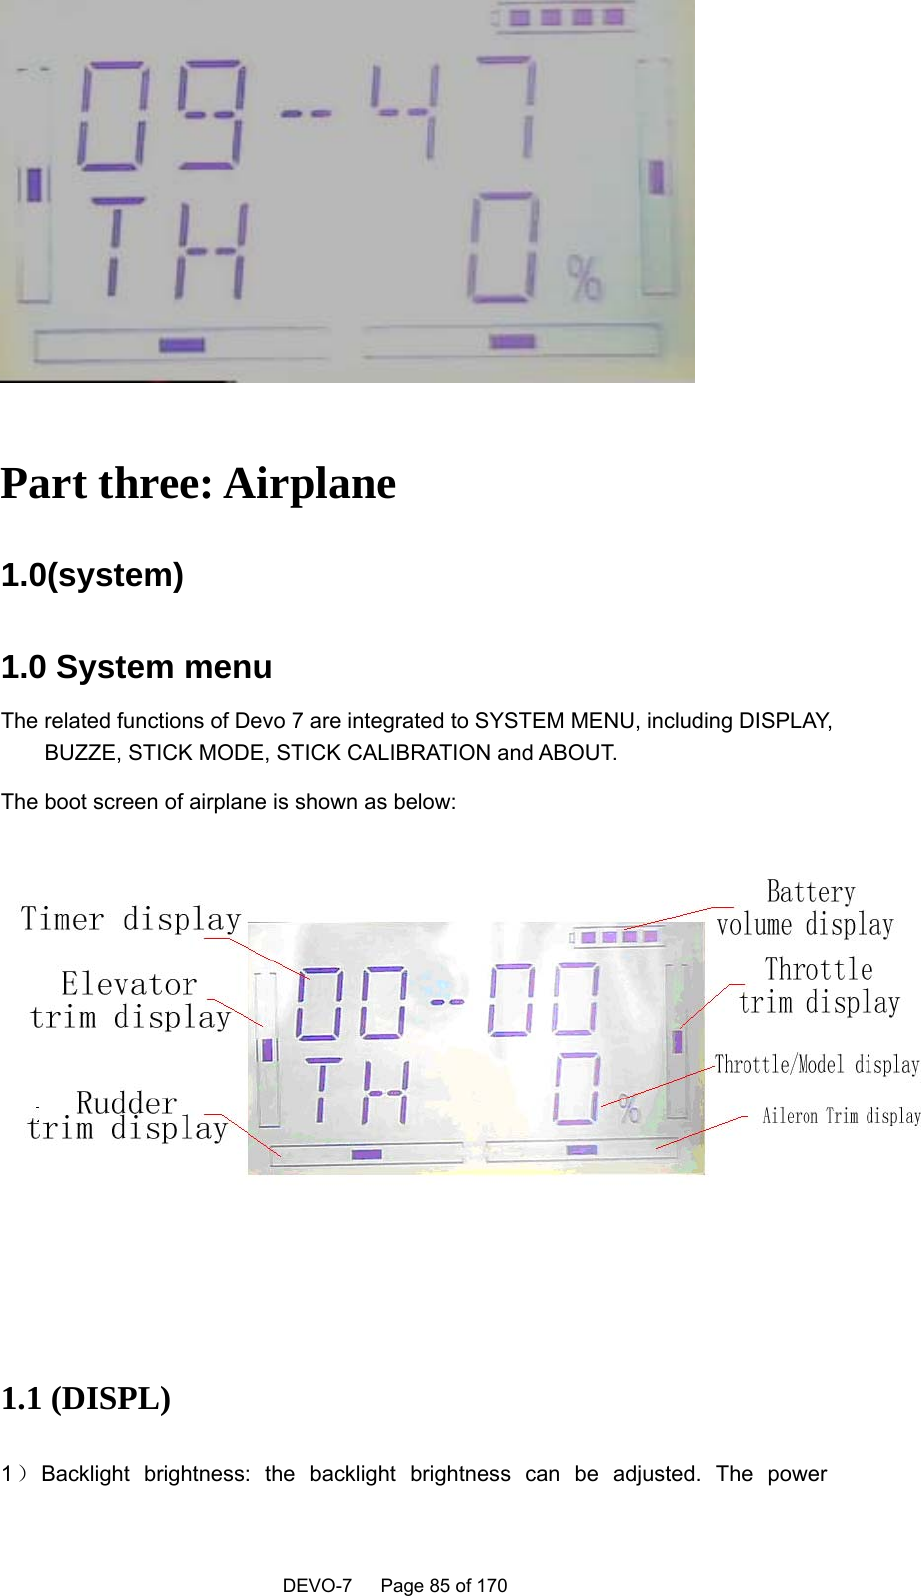    DEVO-7   Page 85 of 170     Part three: Airplane 1.0(system)  1.0 System menu The related functions of Devo 7 are integrated to SYSTEM MENU, including DISPLAY, BUZZE, STICK MODE, STICK CALIBRATION and ABOUT. The boot screen of airplane is shown as below:    1.1 (DISPL)   1）Backlight brightness: the backlight brightness can be adjusted. The power 